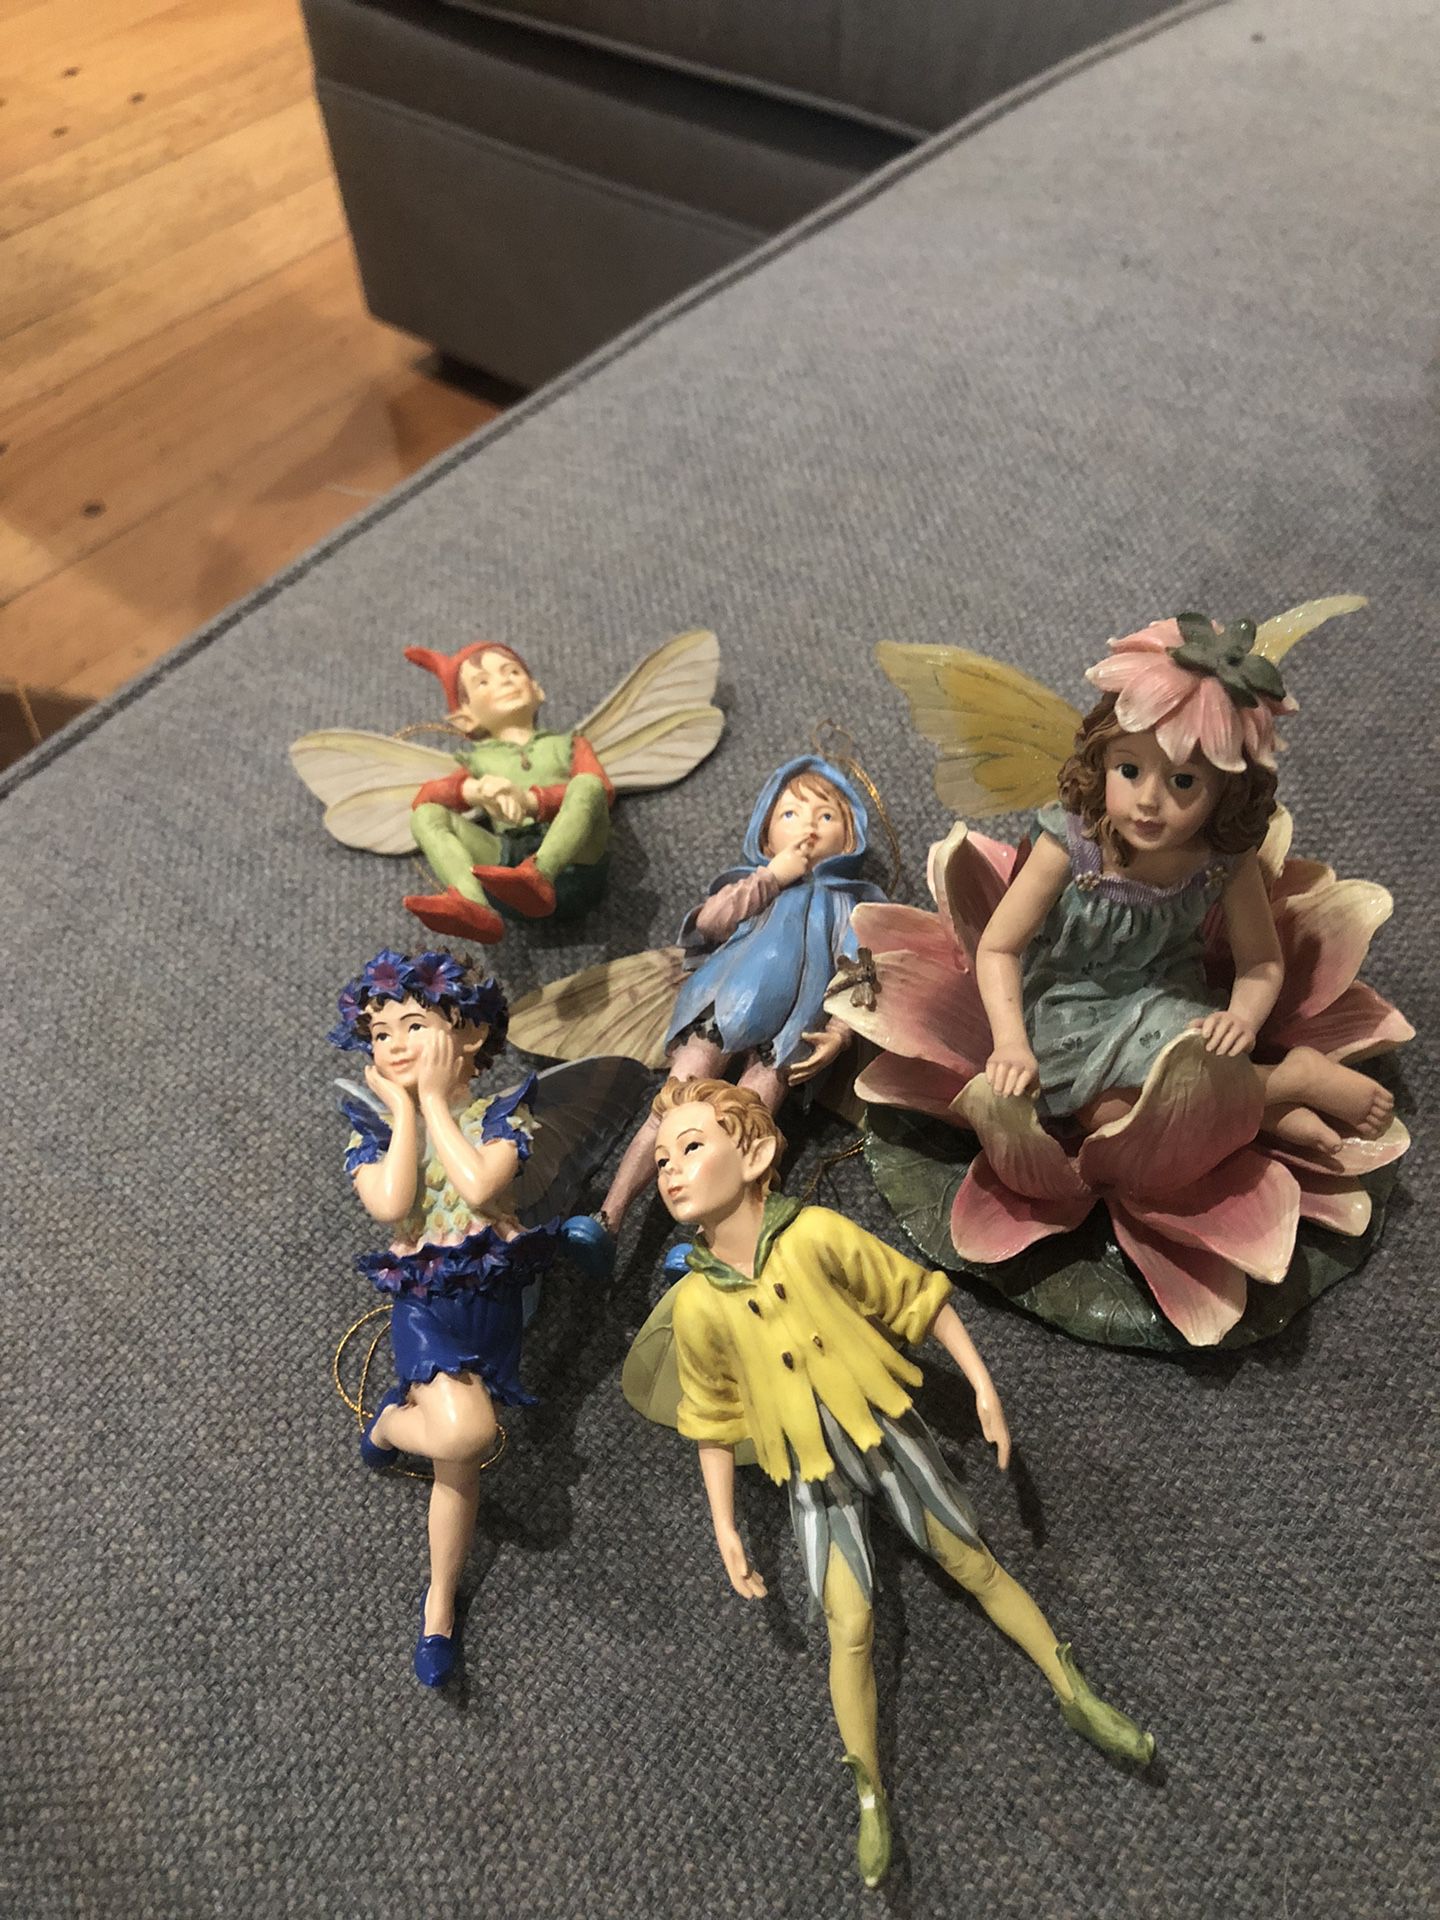 Fairy ornaments and statue